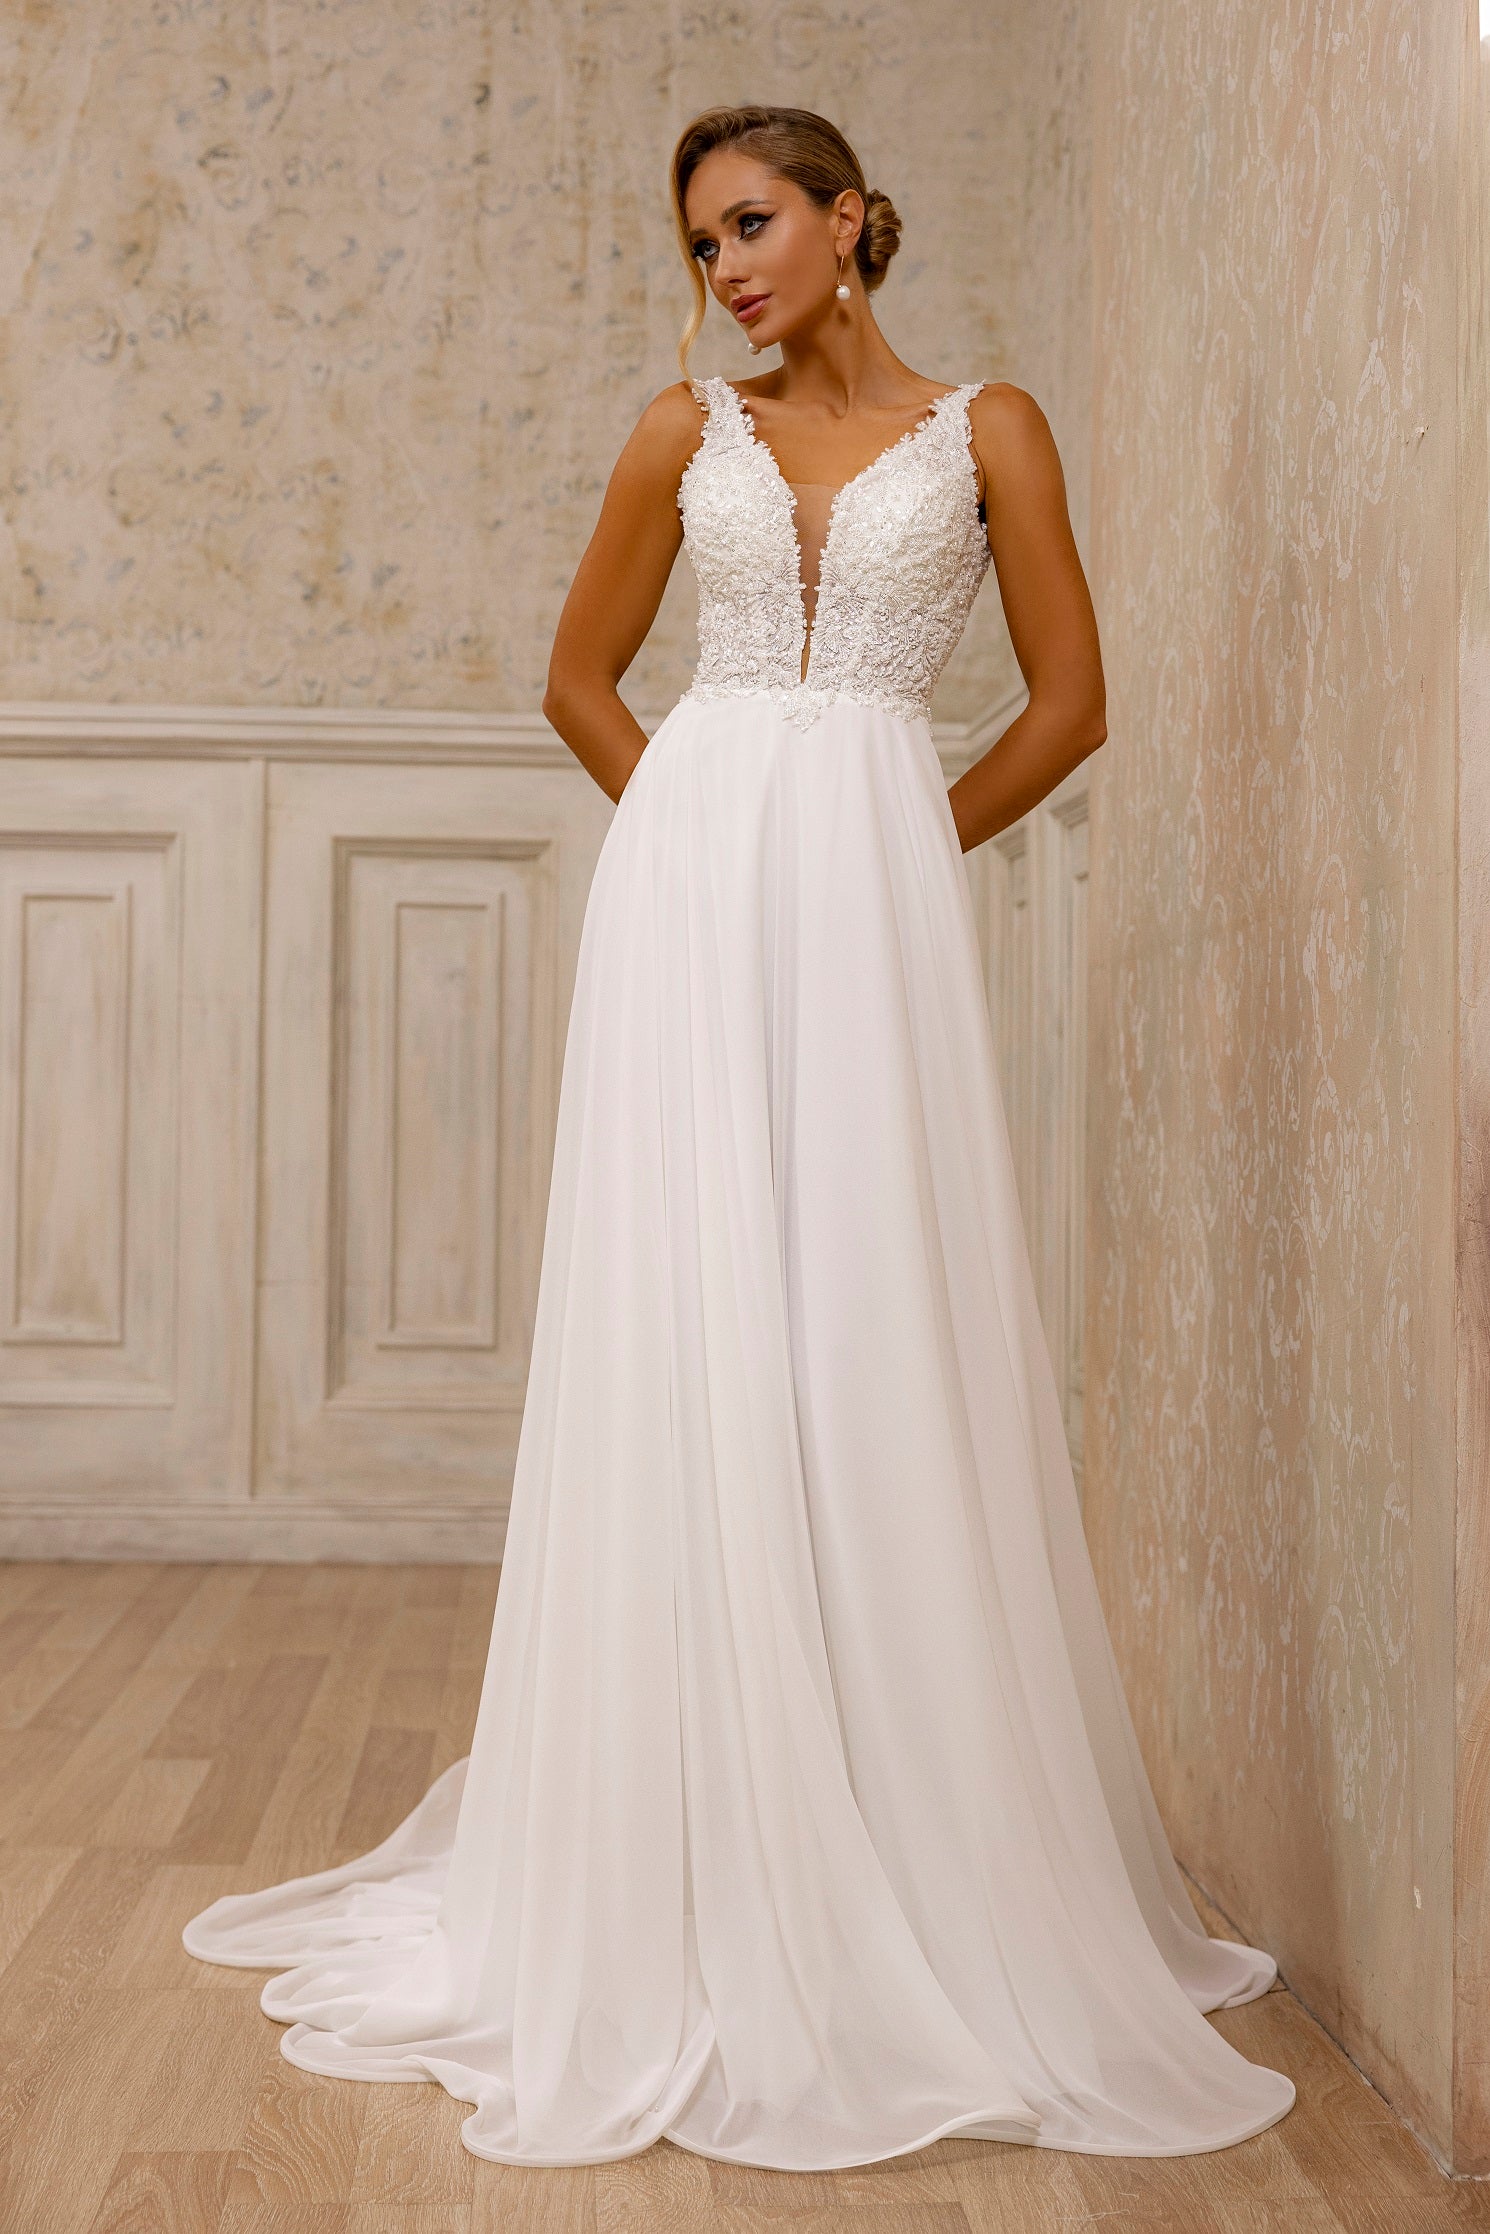 Floral Top Sleeveless A-Line V-Neck Wedding Dress With Short Train  